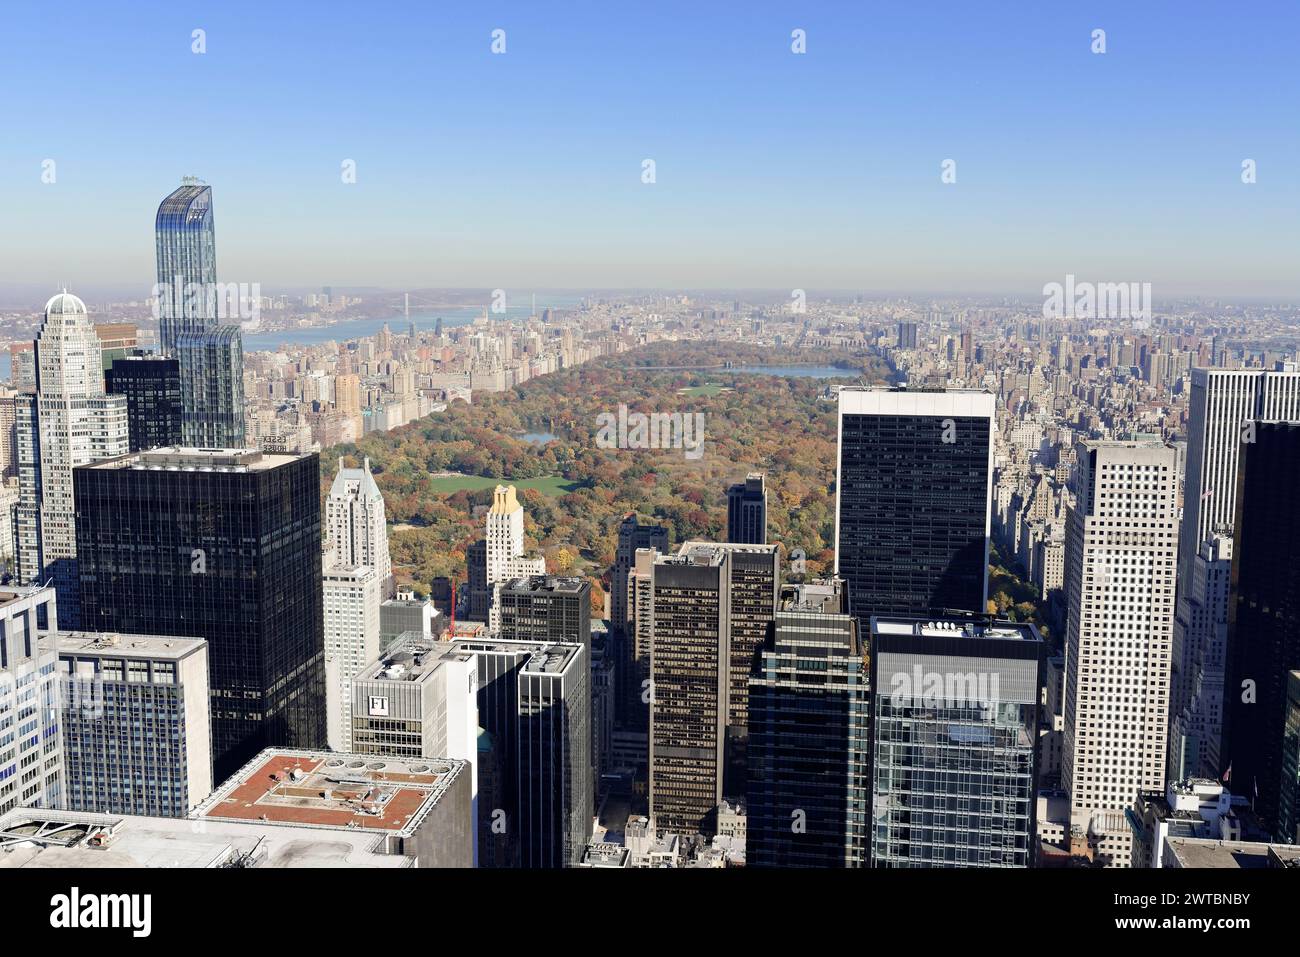 Viewing terrace of Rockefeller Center, wide angle shot of Central Park amidst skyscrapers in autumn, Manhattan, New York City, New York, USA, North Stock Photo